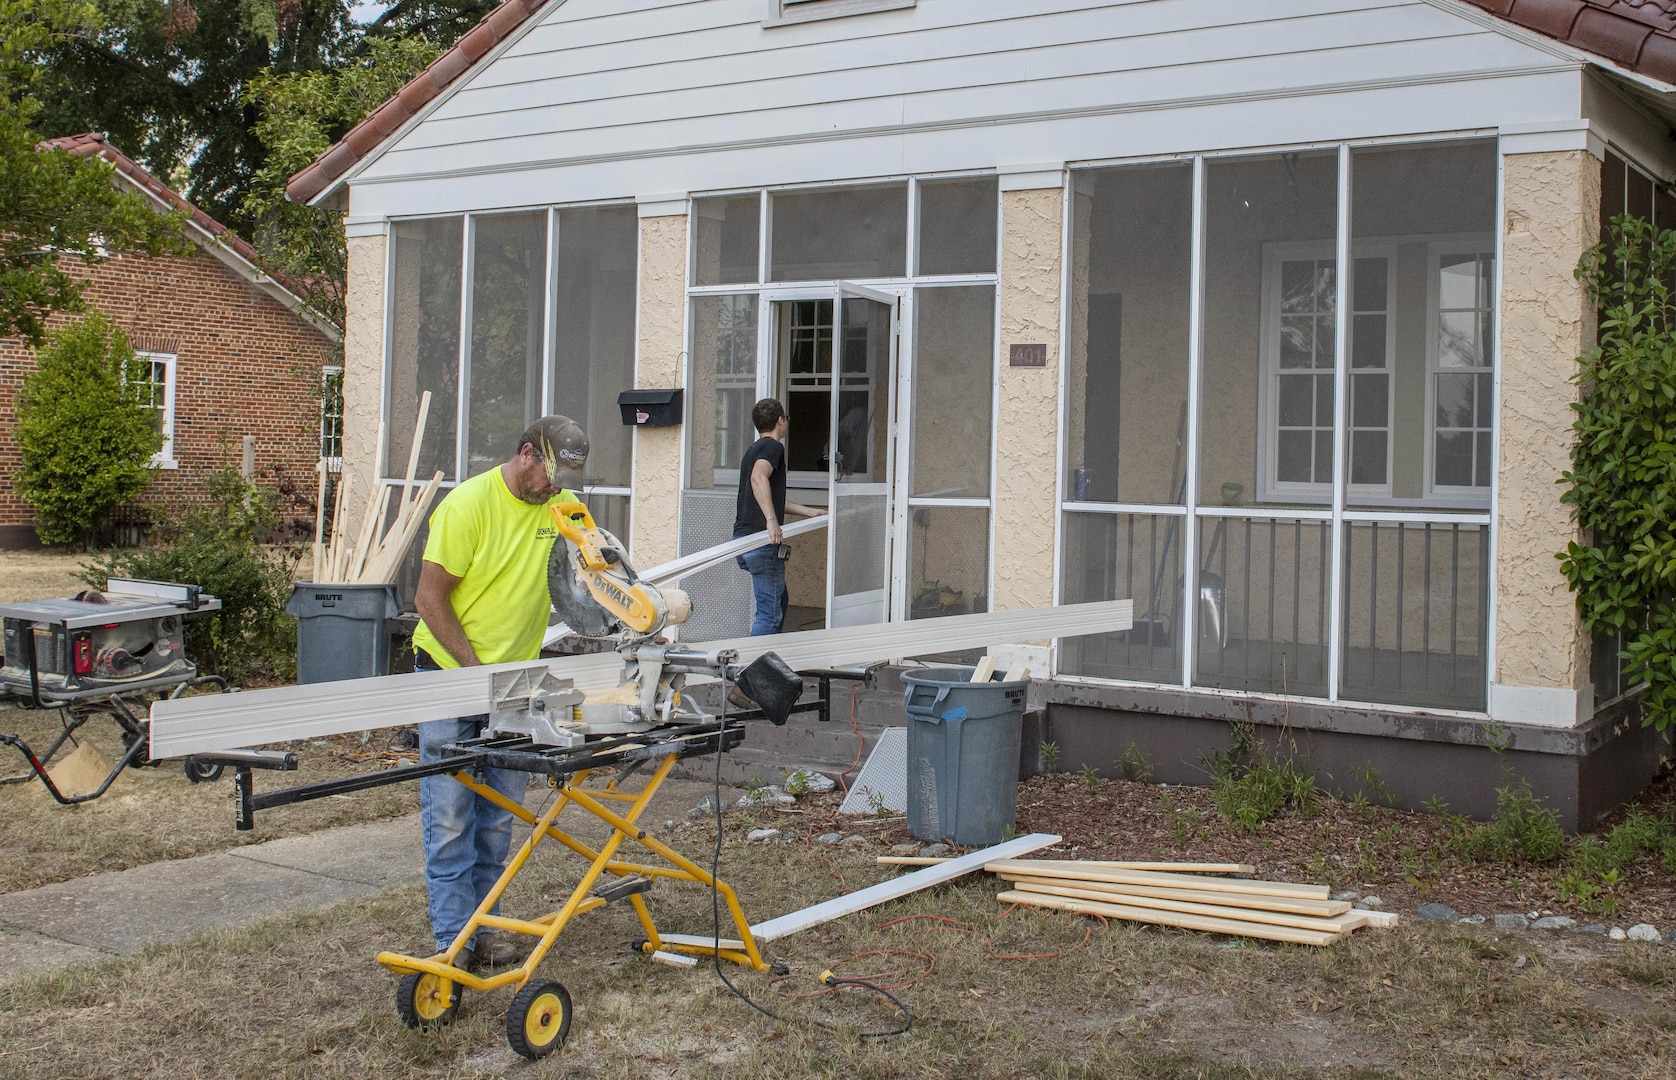 Workers install new windows at one of the historic homes on Fort Benning, Georgia, Oct. 1, 2020. Modifications to these homes are part of a broader effort underway to eliminate lead-based paint hazards in these facilities.